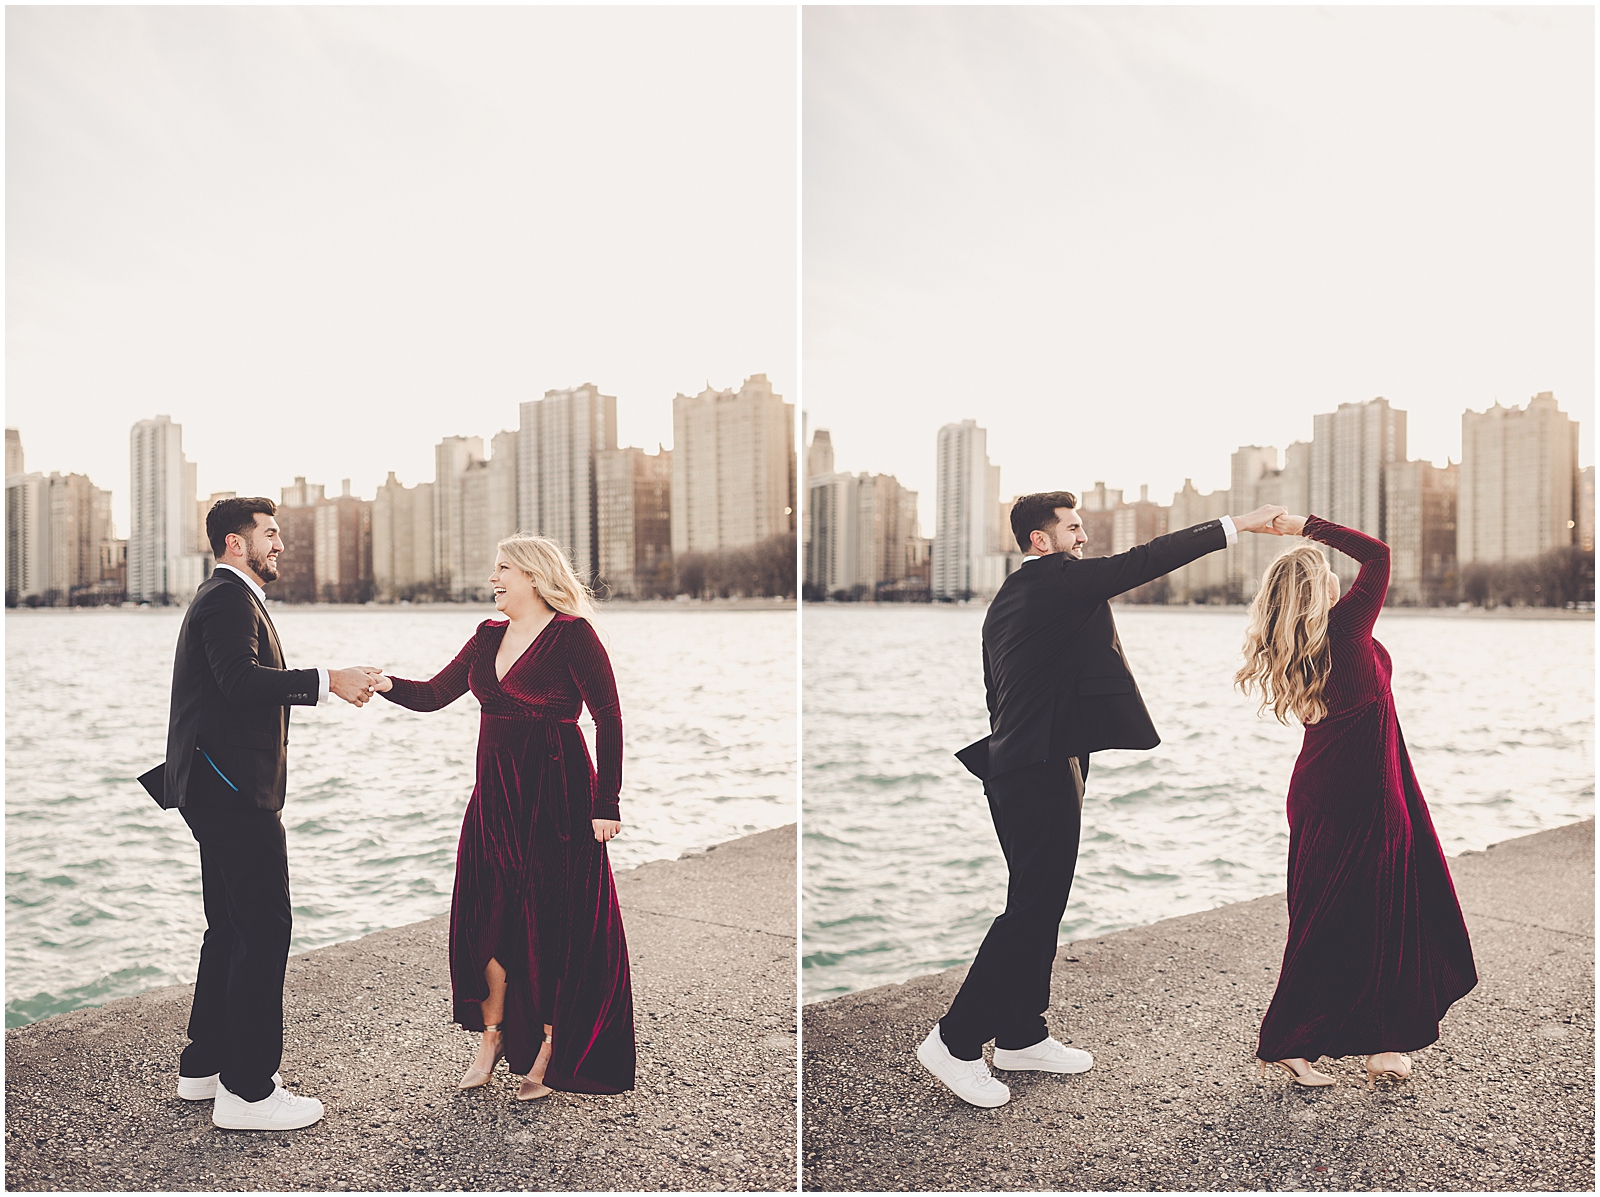 Andrea and Chris's Lincoln Park and North Avenue Beach engagement in Chicago, Illinois with Chicagoland photographer Kara Evans Photographer.